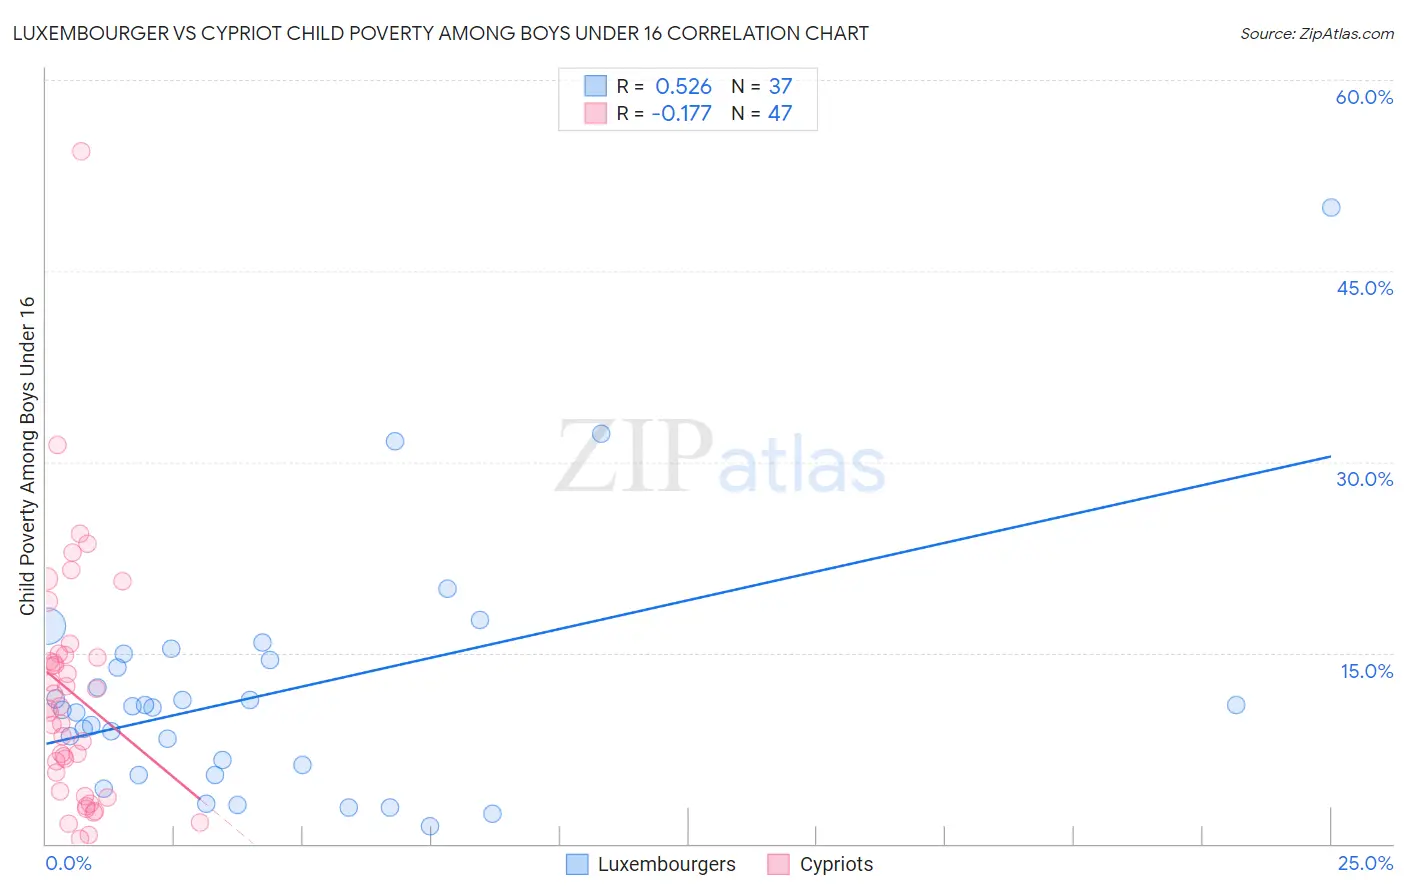 Luxembourger vs Cypriot Child Poverty Among Boys Under 16